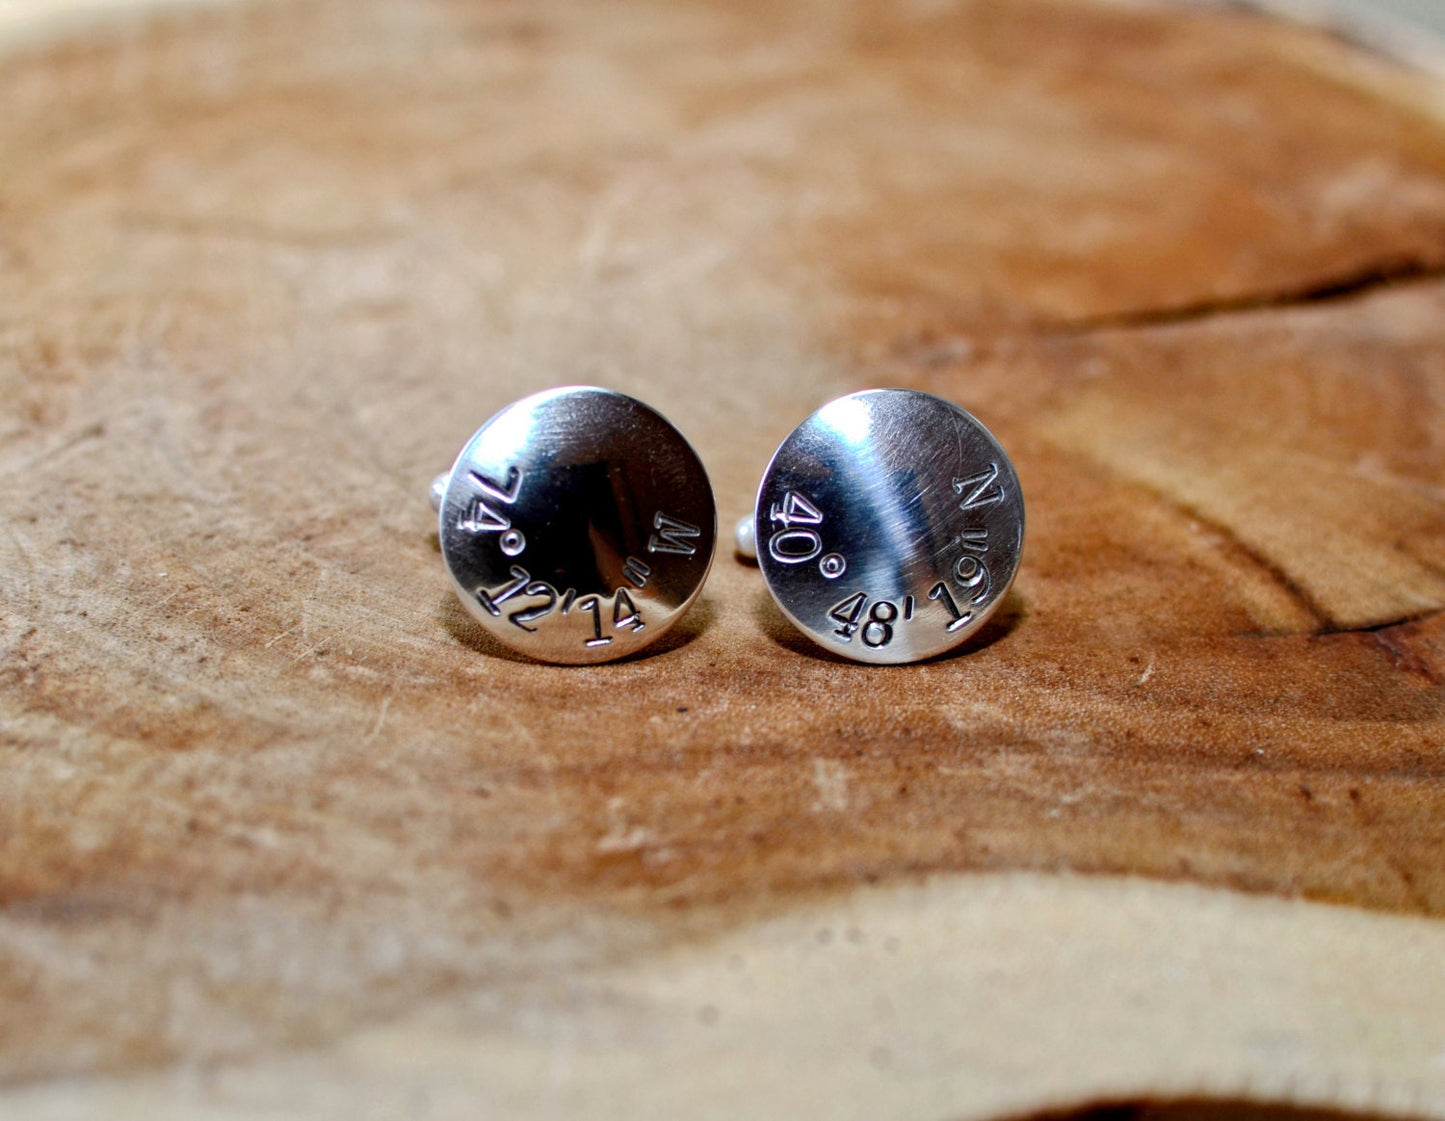 Location themed sterling silver cuff links with your latitude and longitude coordinates